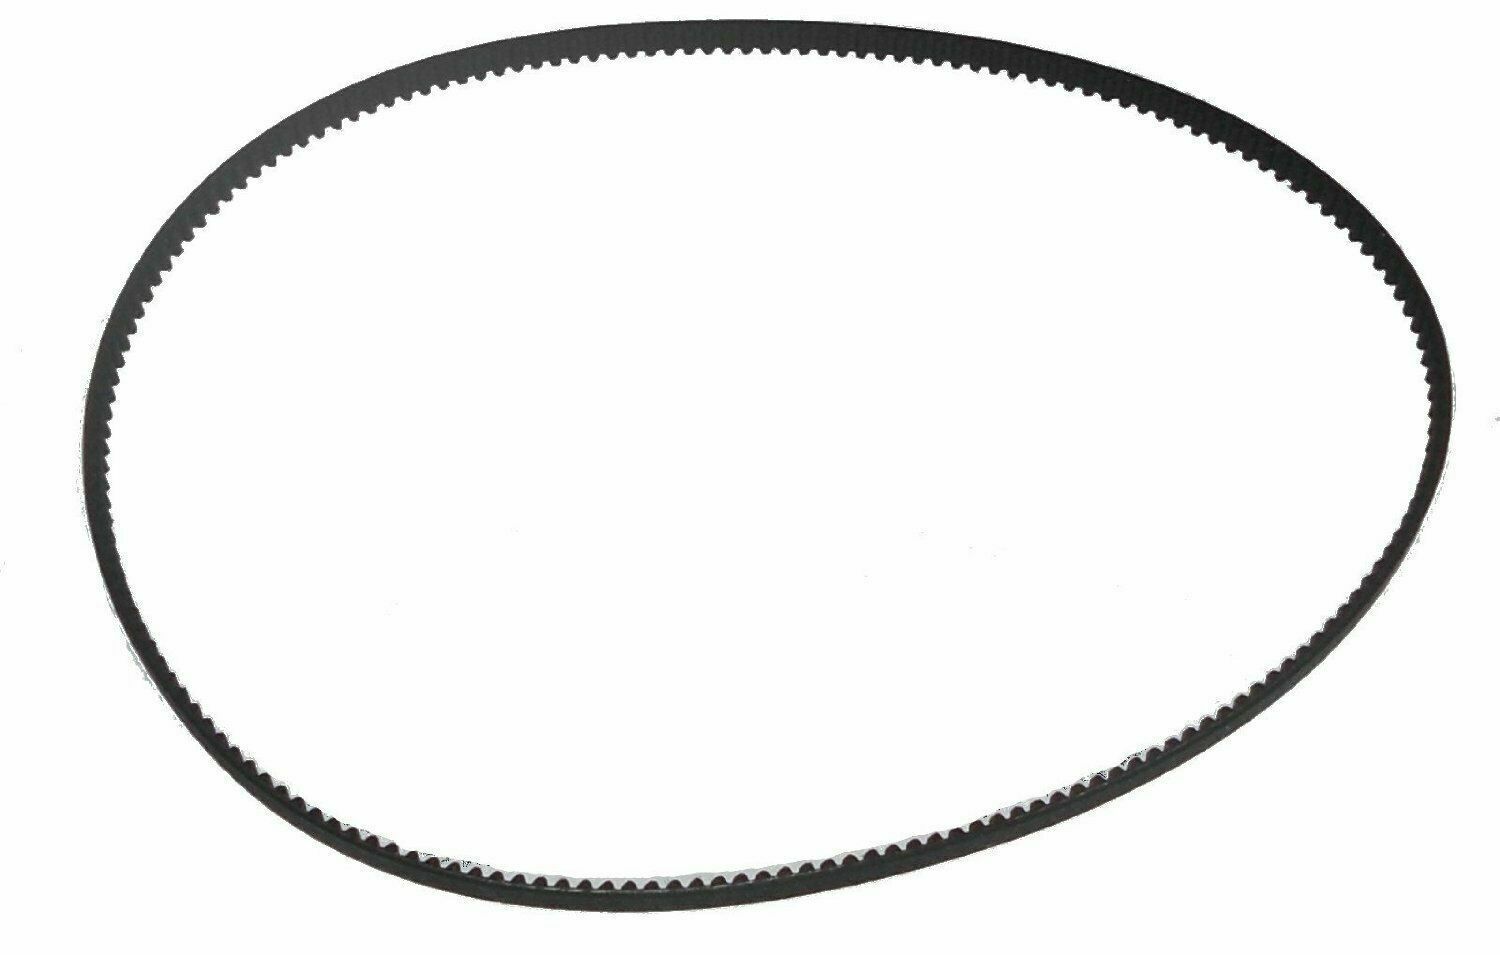 Primary image for "New Replacement Belt" for Oster Bread Maker Machine 5821